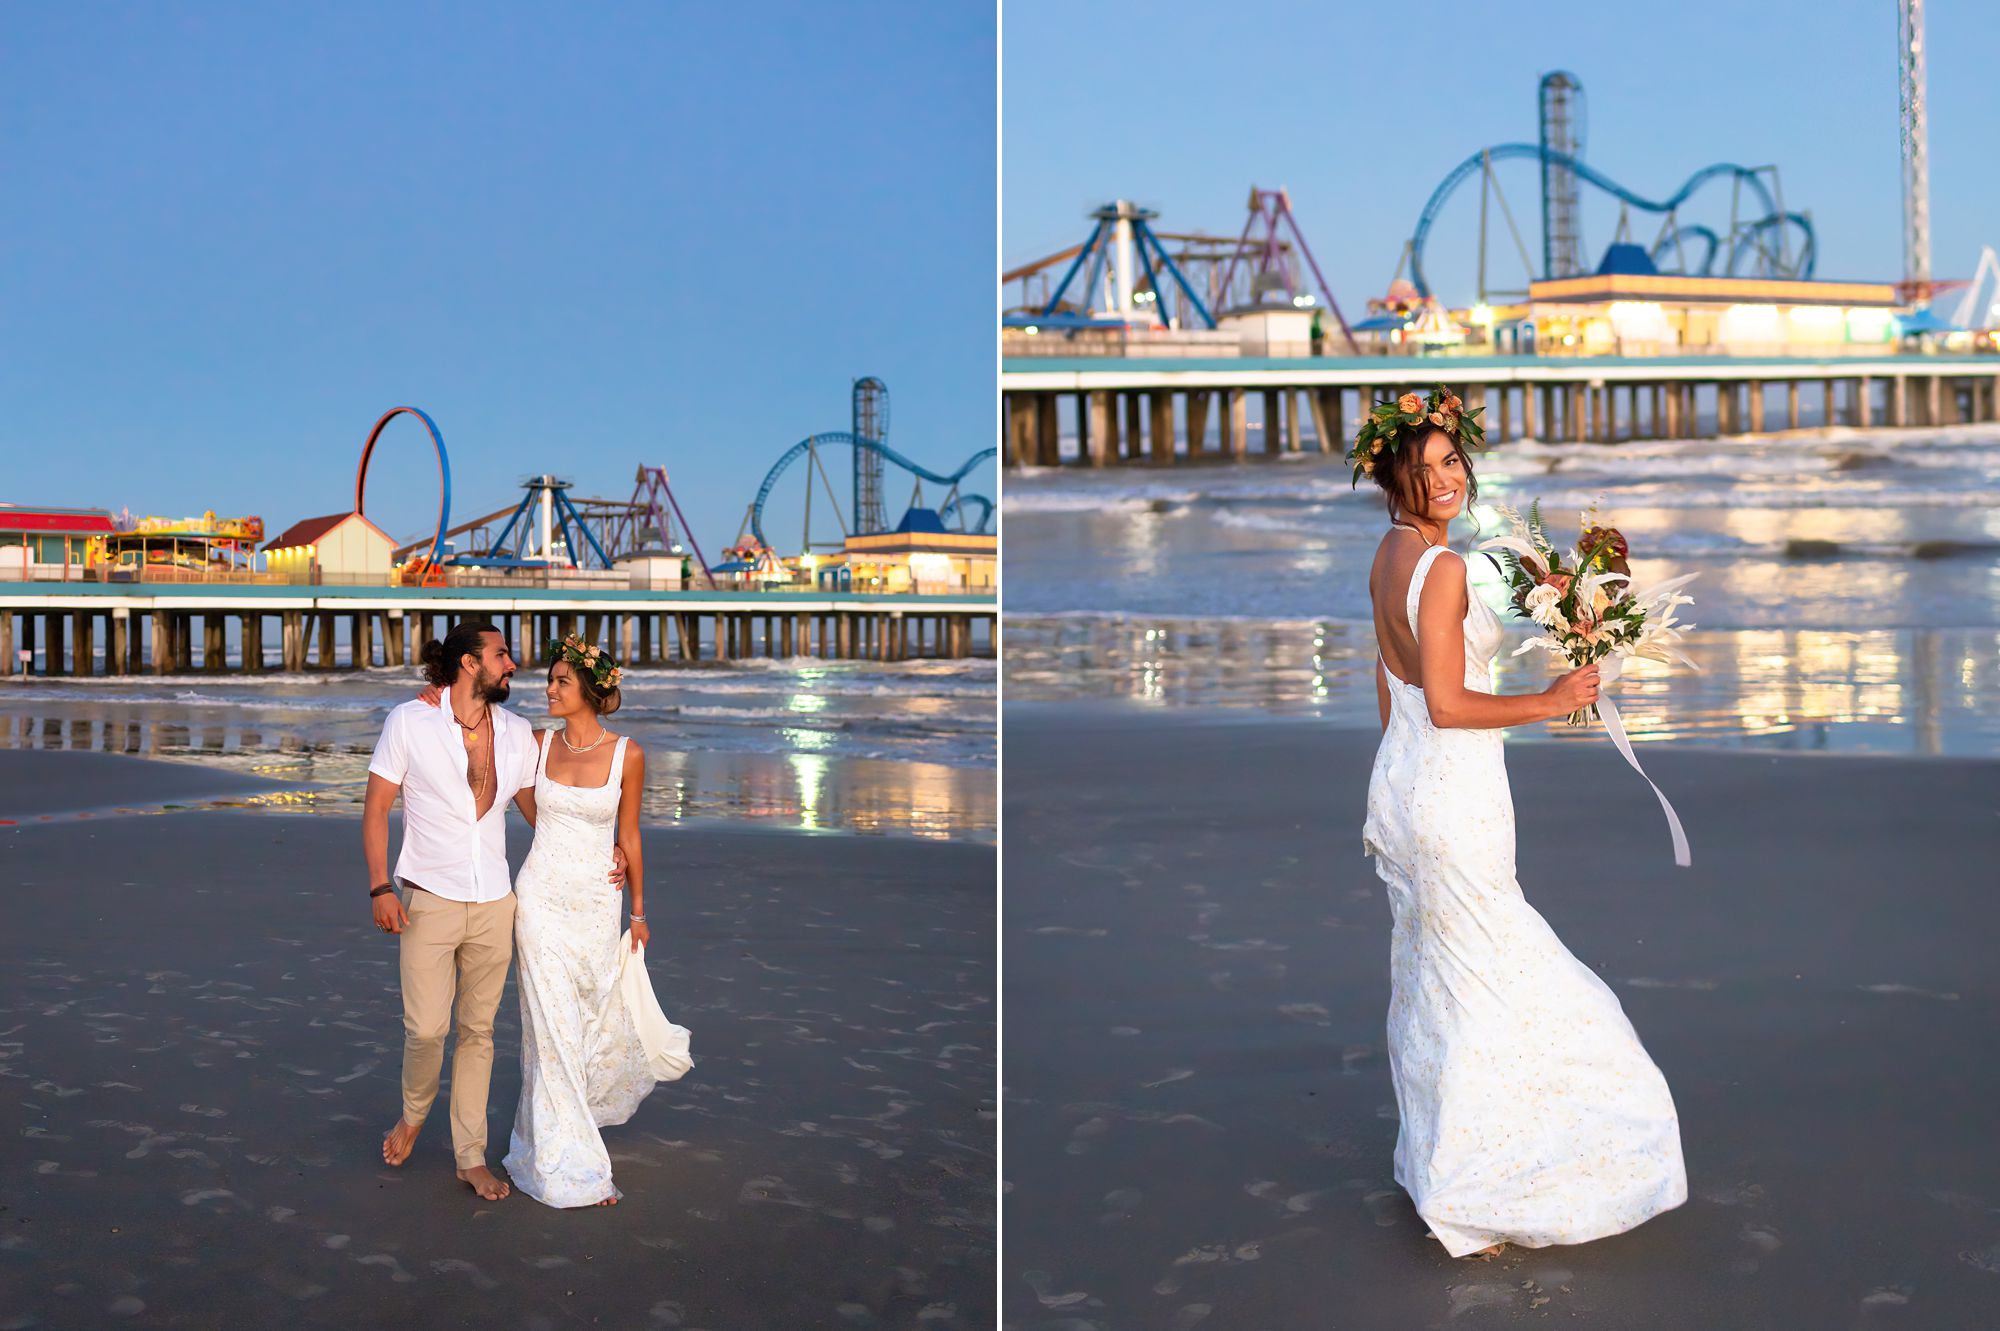 A bride and groom walk along a Galveston beach with Pleasure Pier in the background.